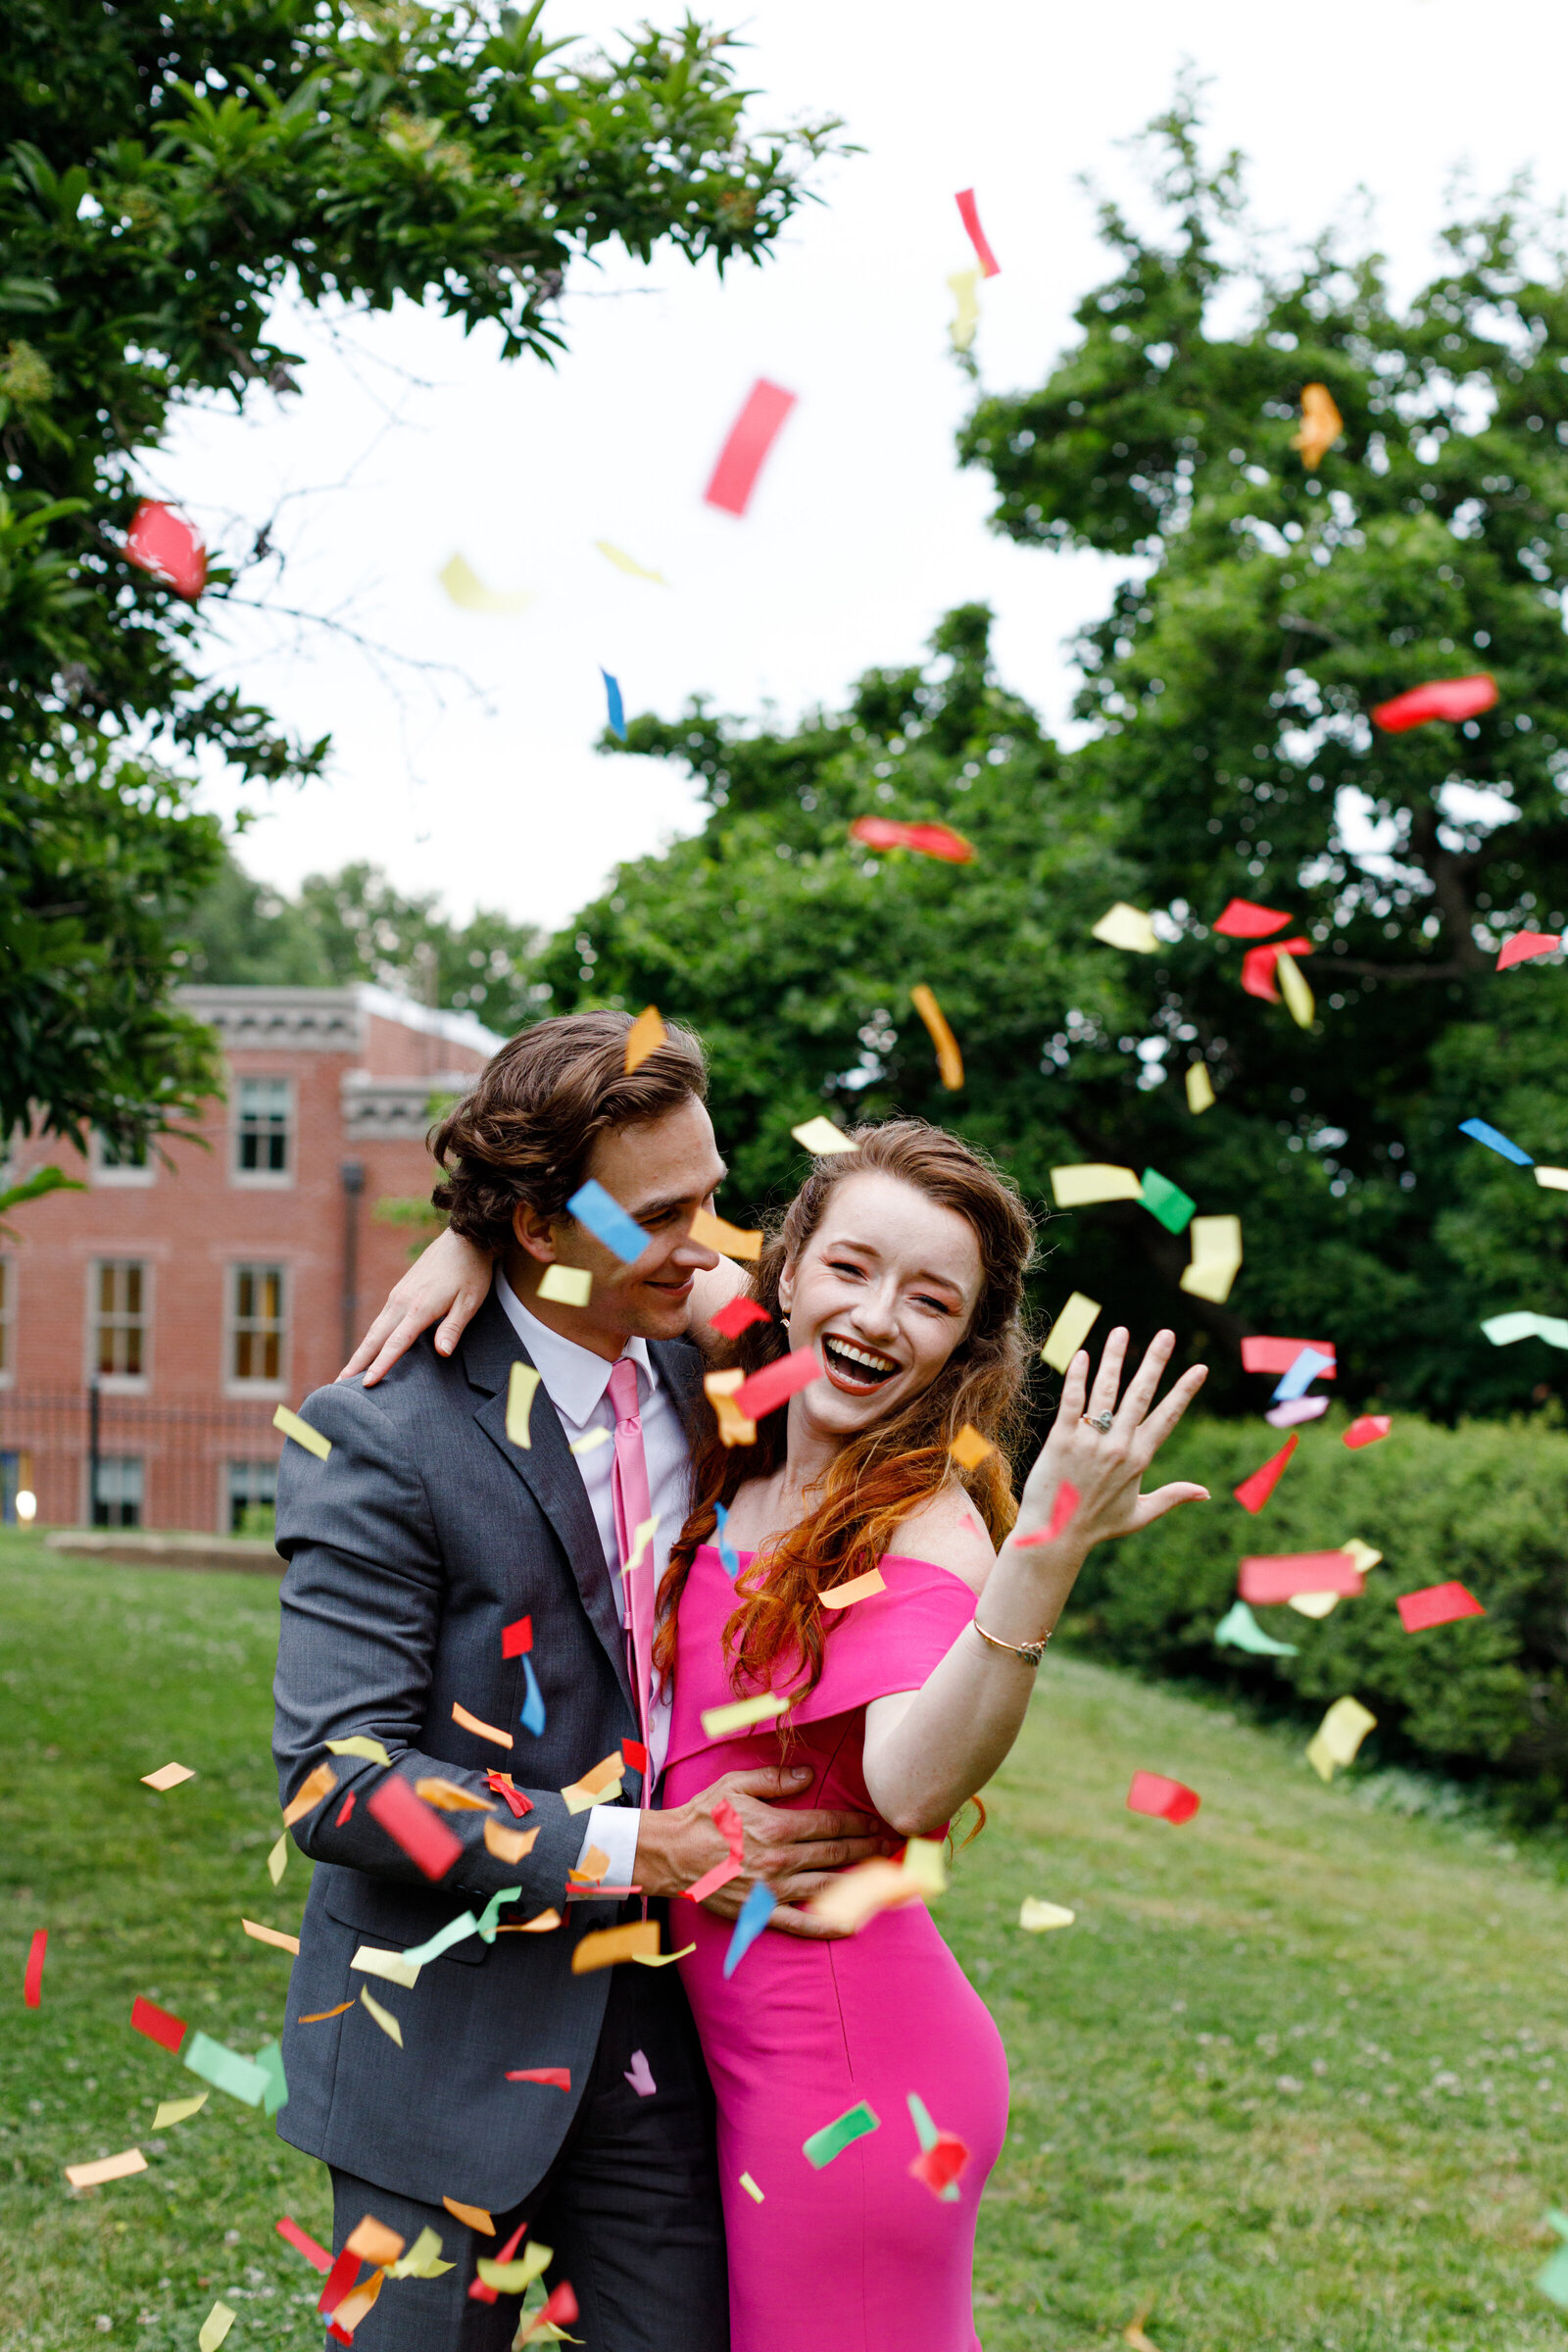 DC Engagement Shoot at Georgetown University Campus. Couple with confetti bomb